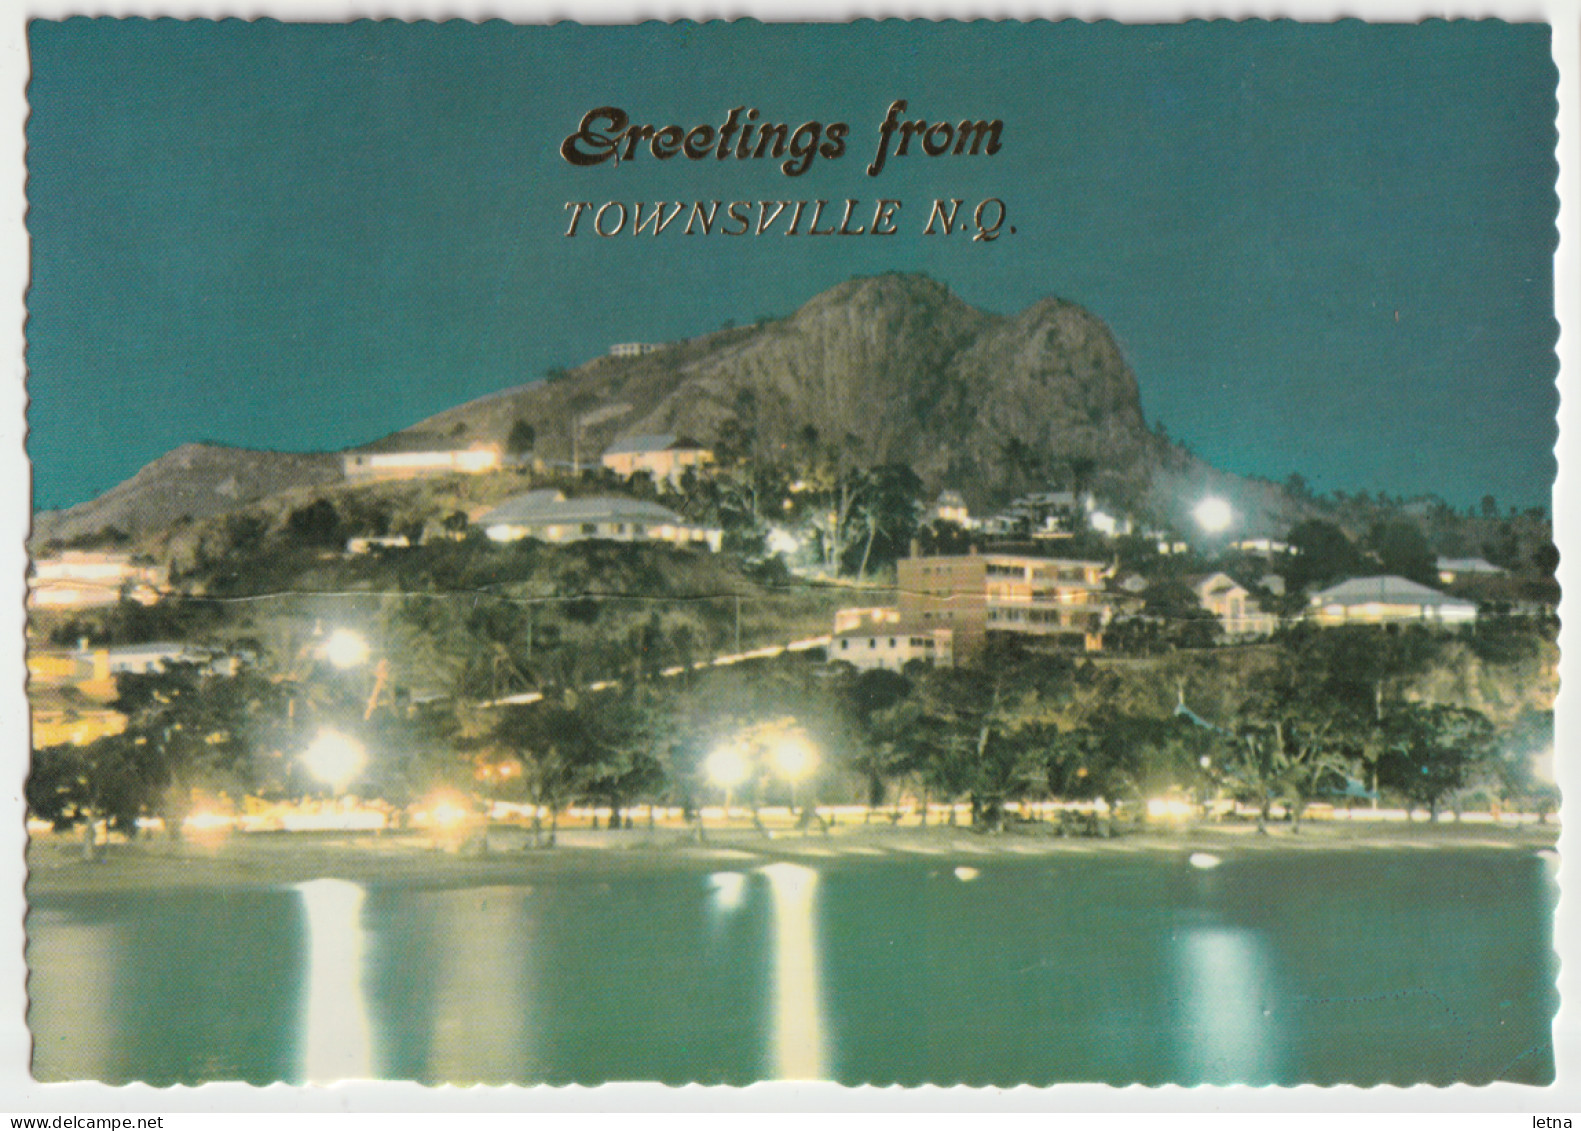 Australia QUEENSLAND QLD Castle Hill By Night TOWNSVILLE Murray Views W47 Postcard C1970s - Townsville